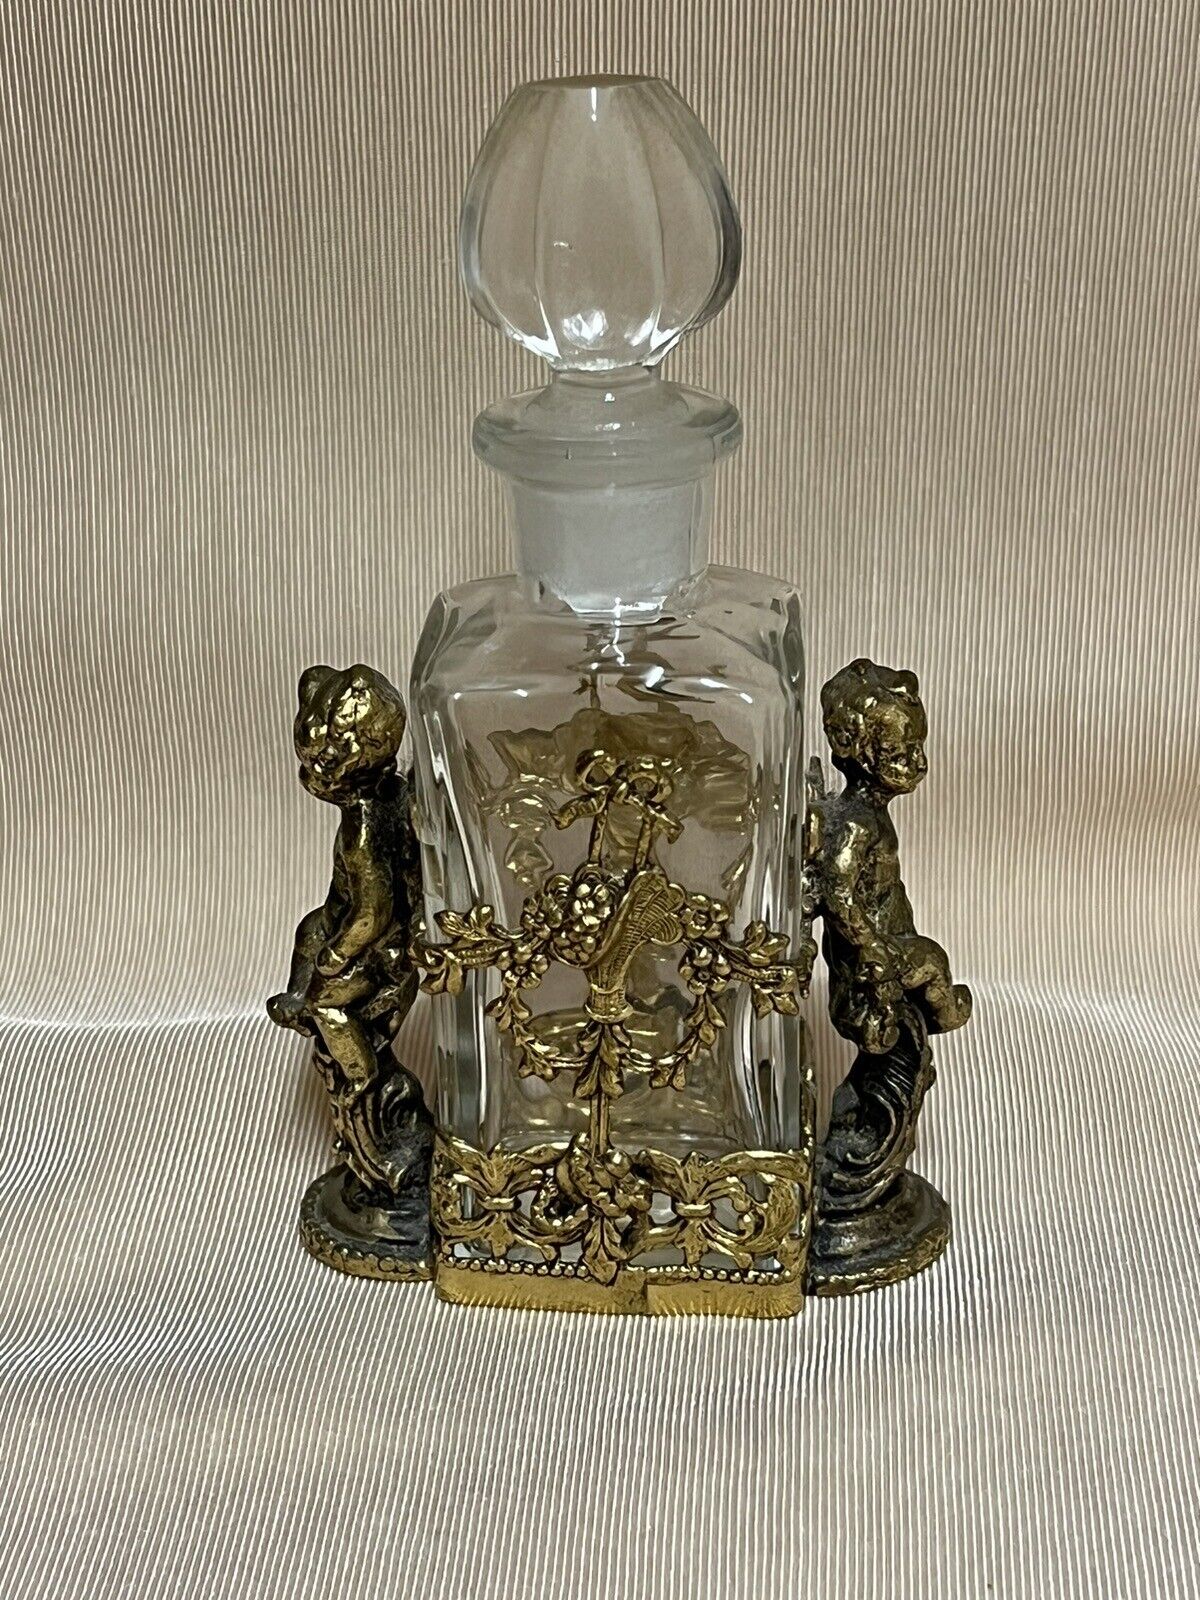 GORGEOUS FINE ANTIQUE FRENCH BRASS OVERLAY CUT CRYSTAL PERFUME BOTTLE W PUTTI